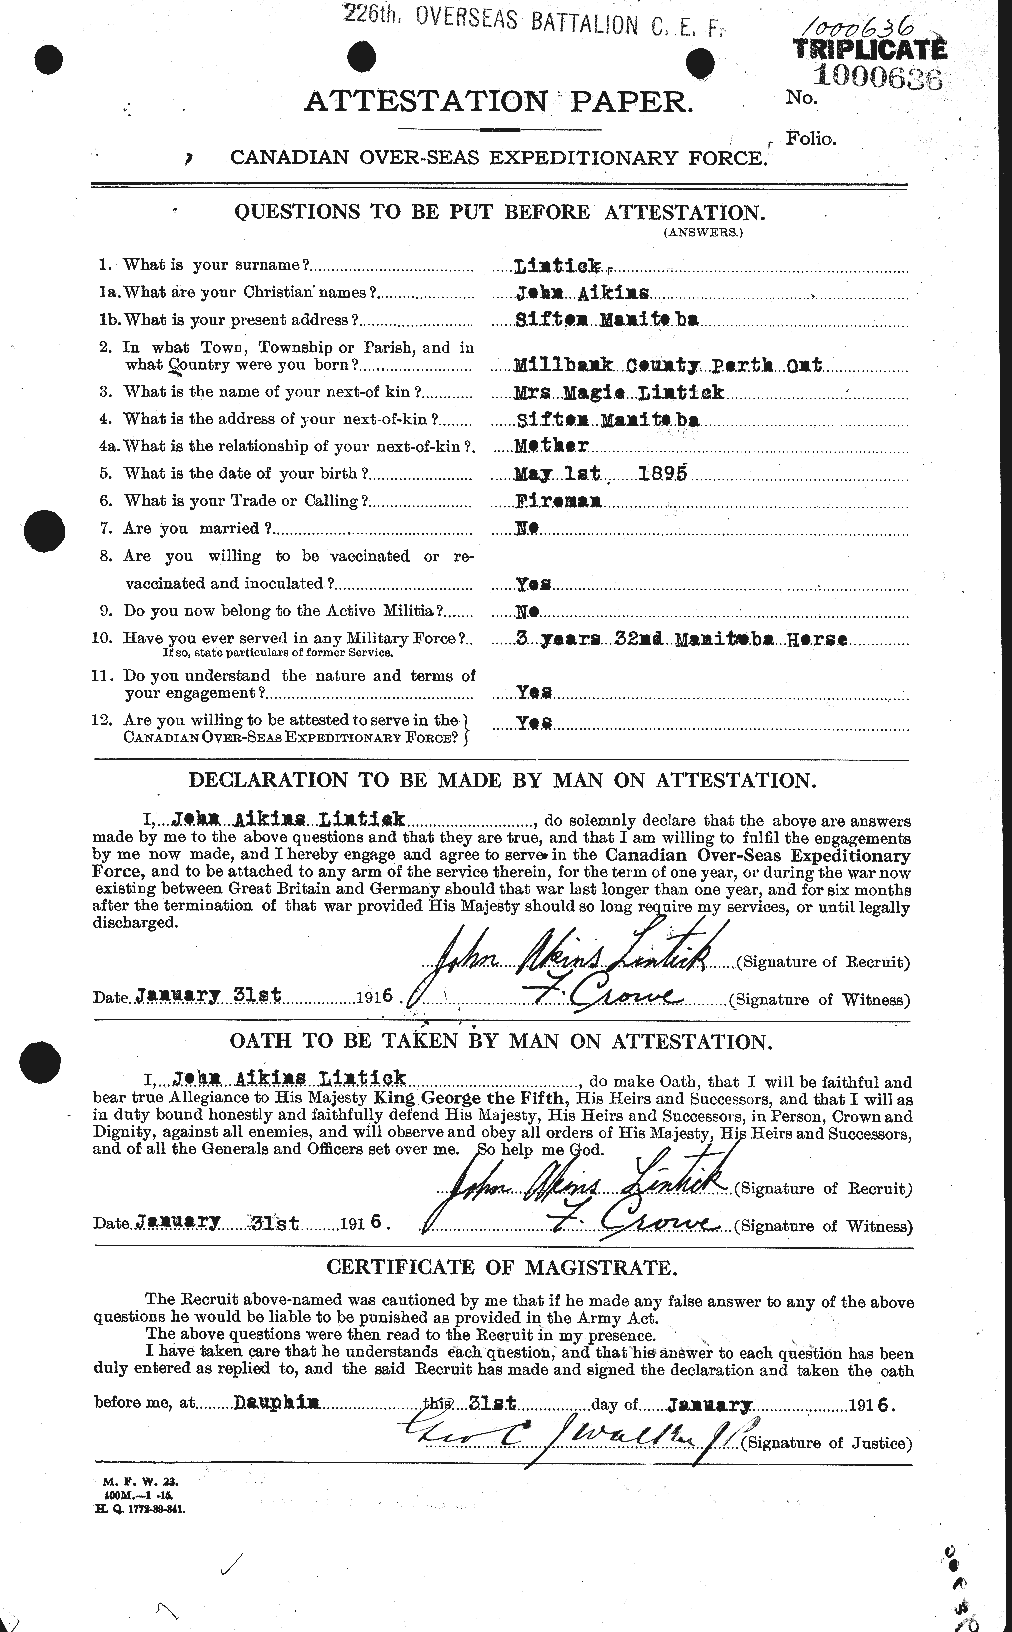 Personnel Records of the First World War - CEF 468708a